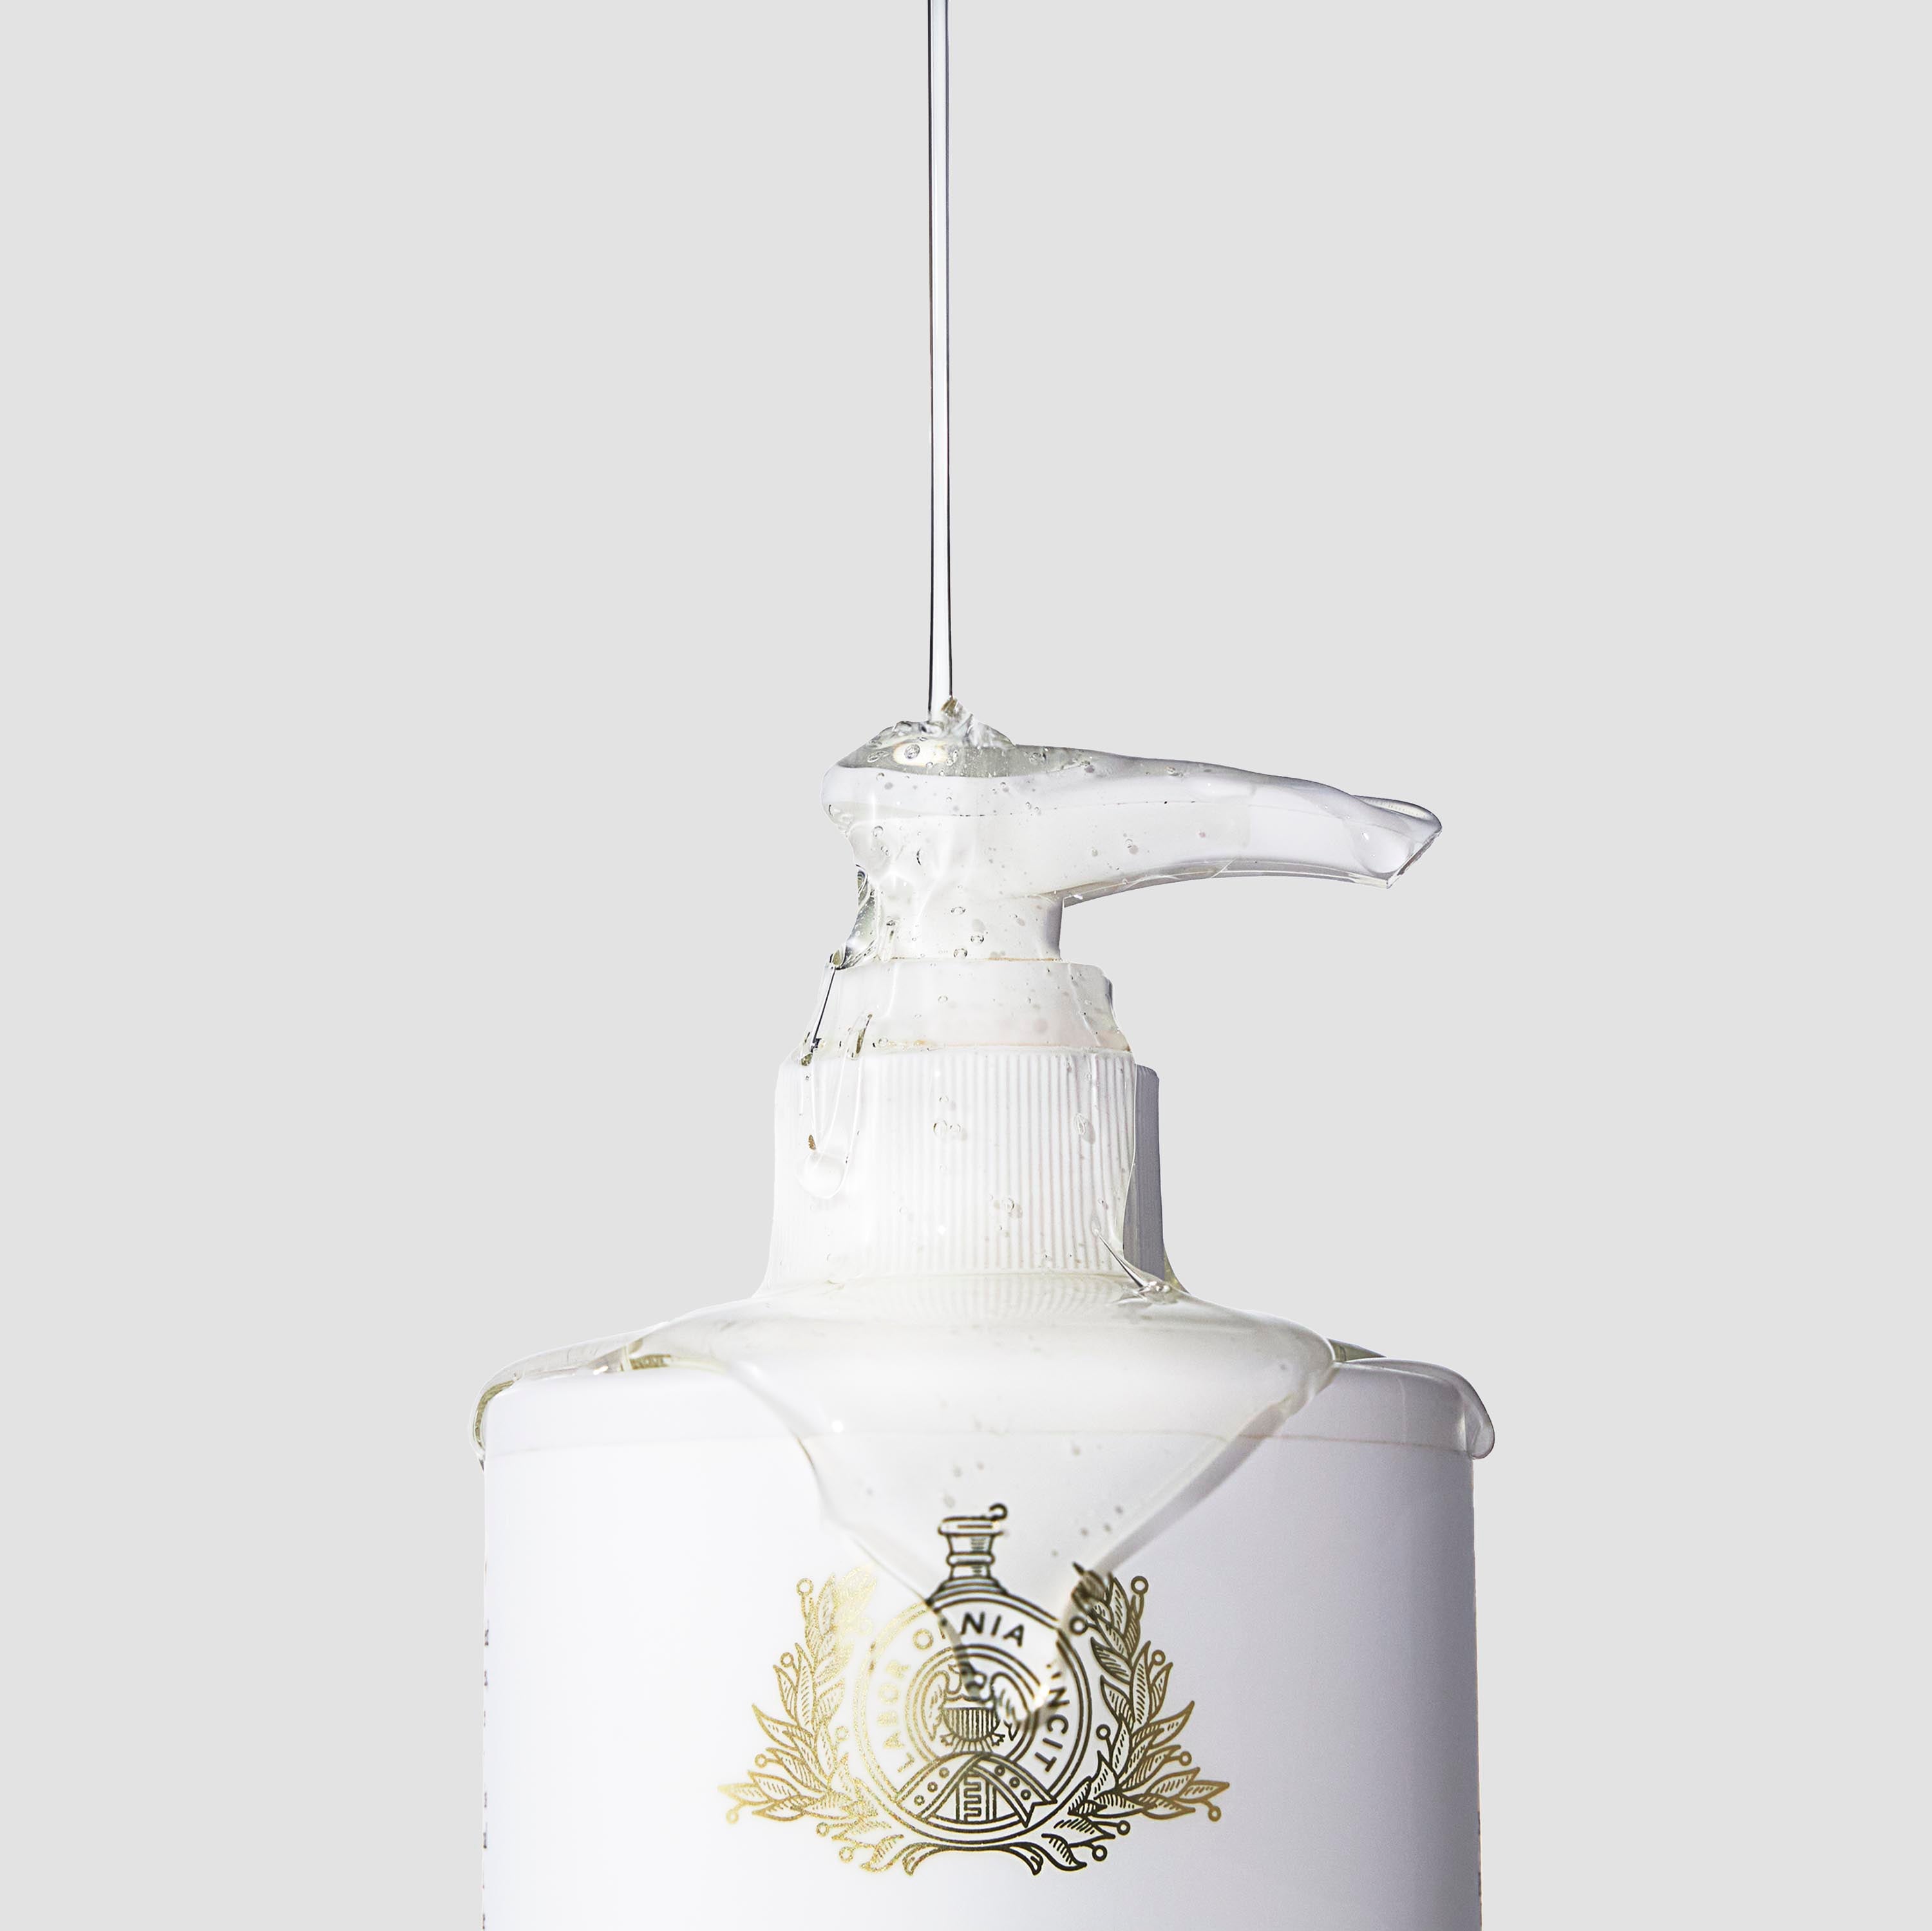 Caswell-Massey Rosewater Hand Wash in a 10 oz. pump bottle shown with liquid soap dripping